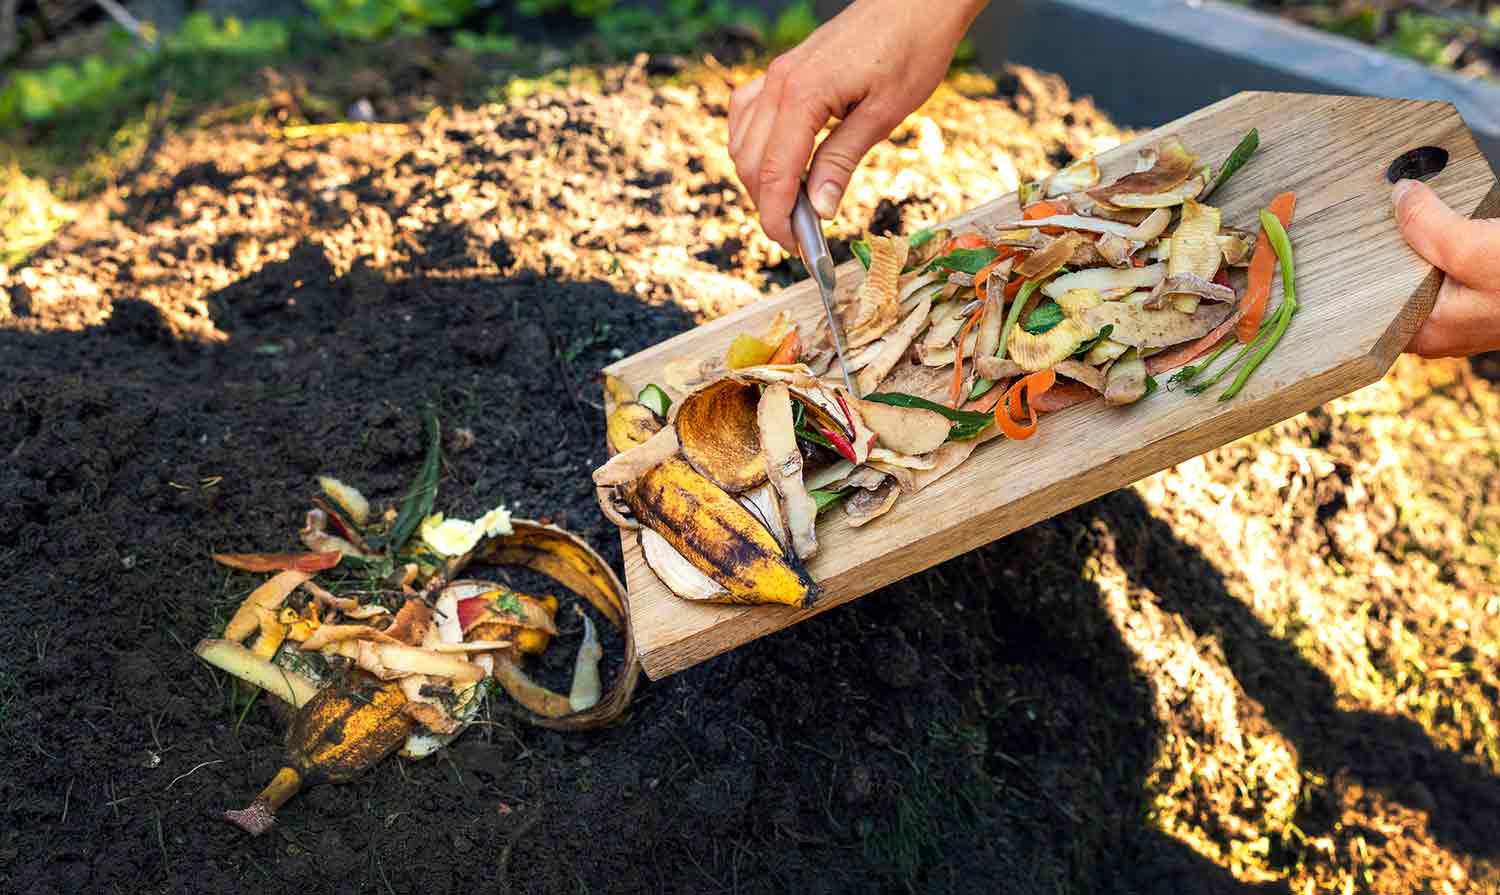 A knife is used to scrap food scraps from a wooden cutting board to a compost pile.